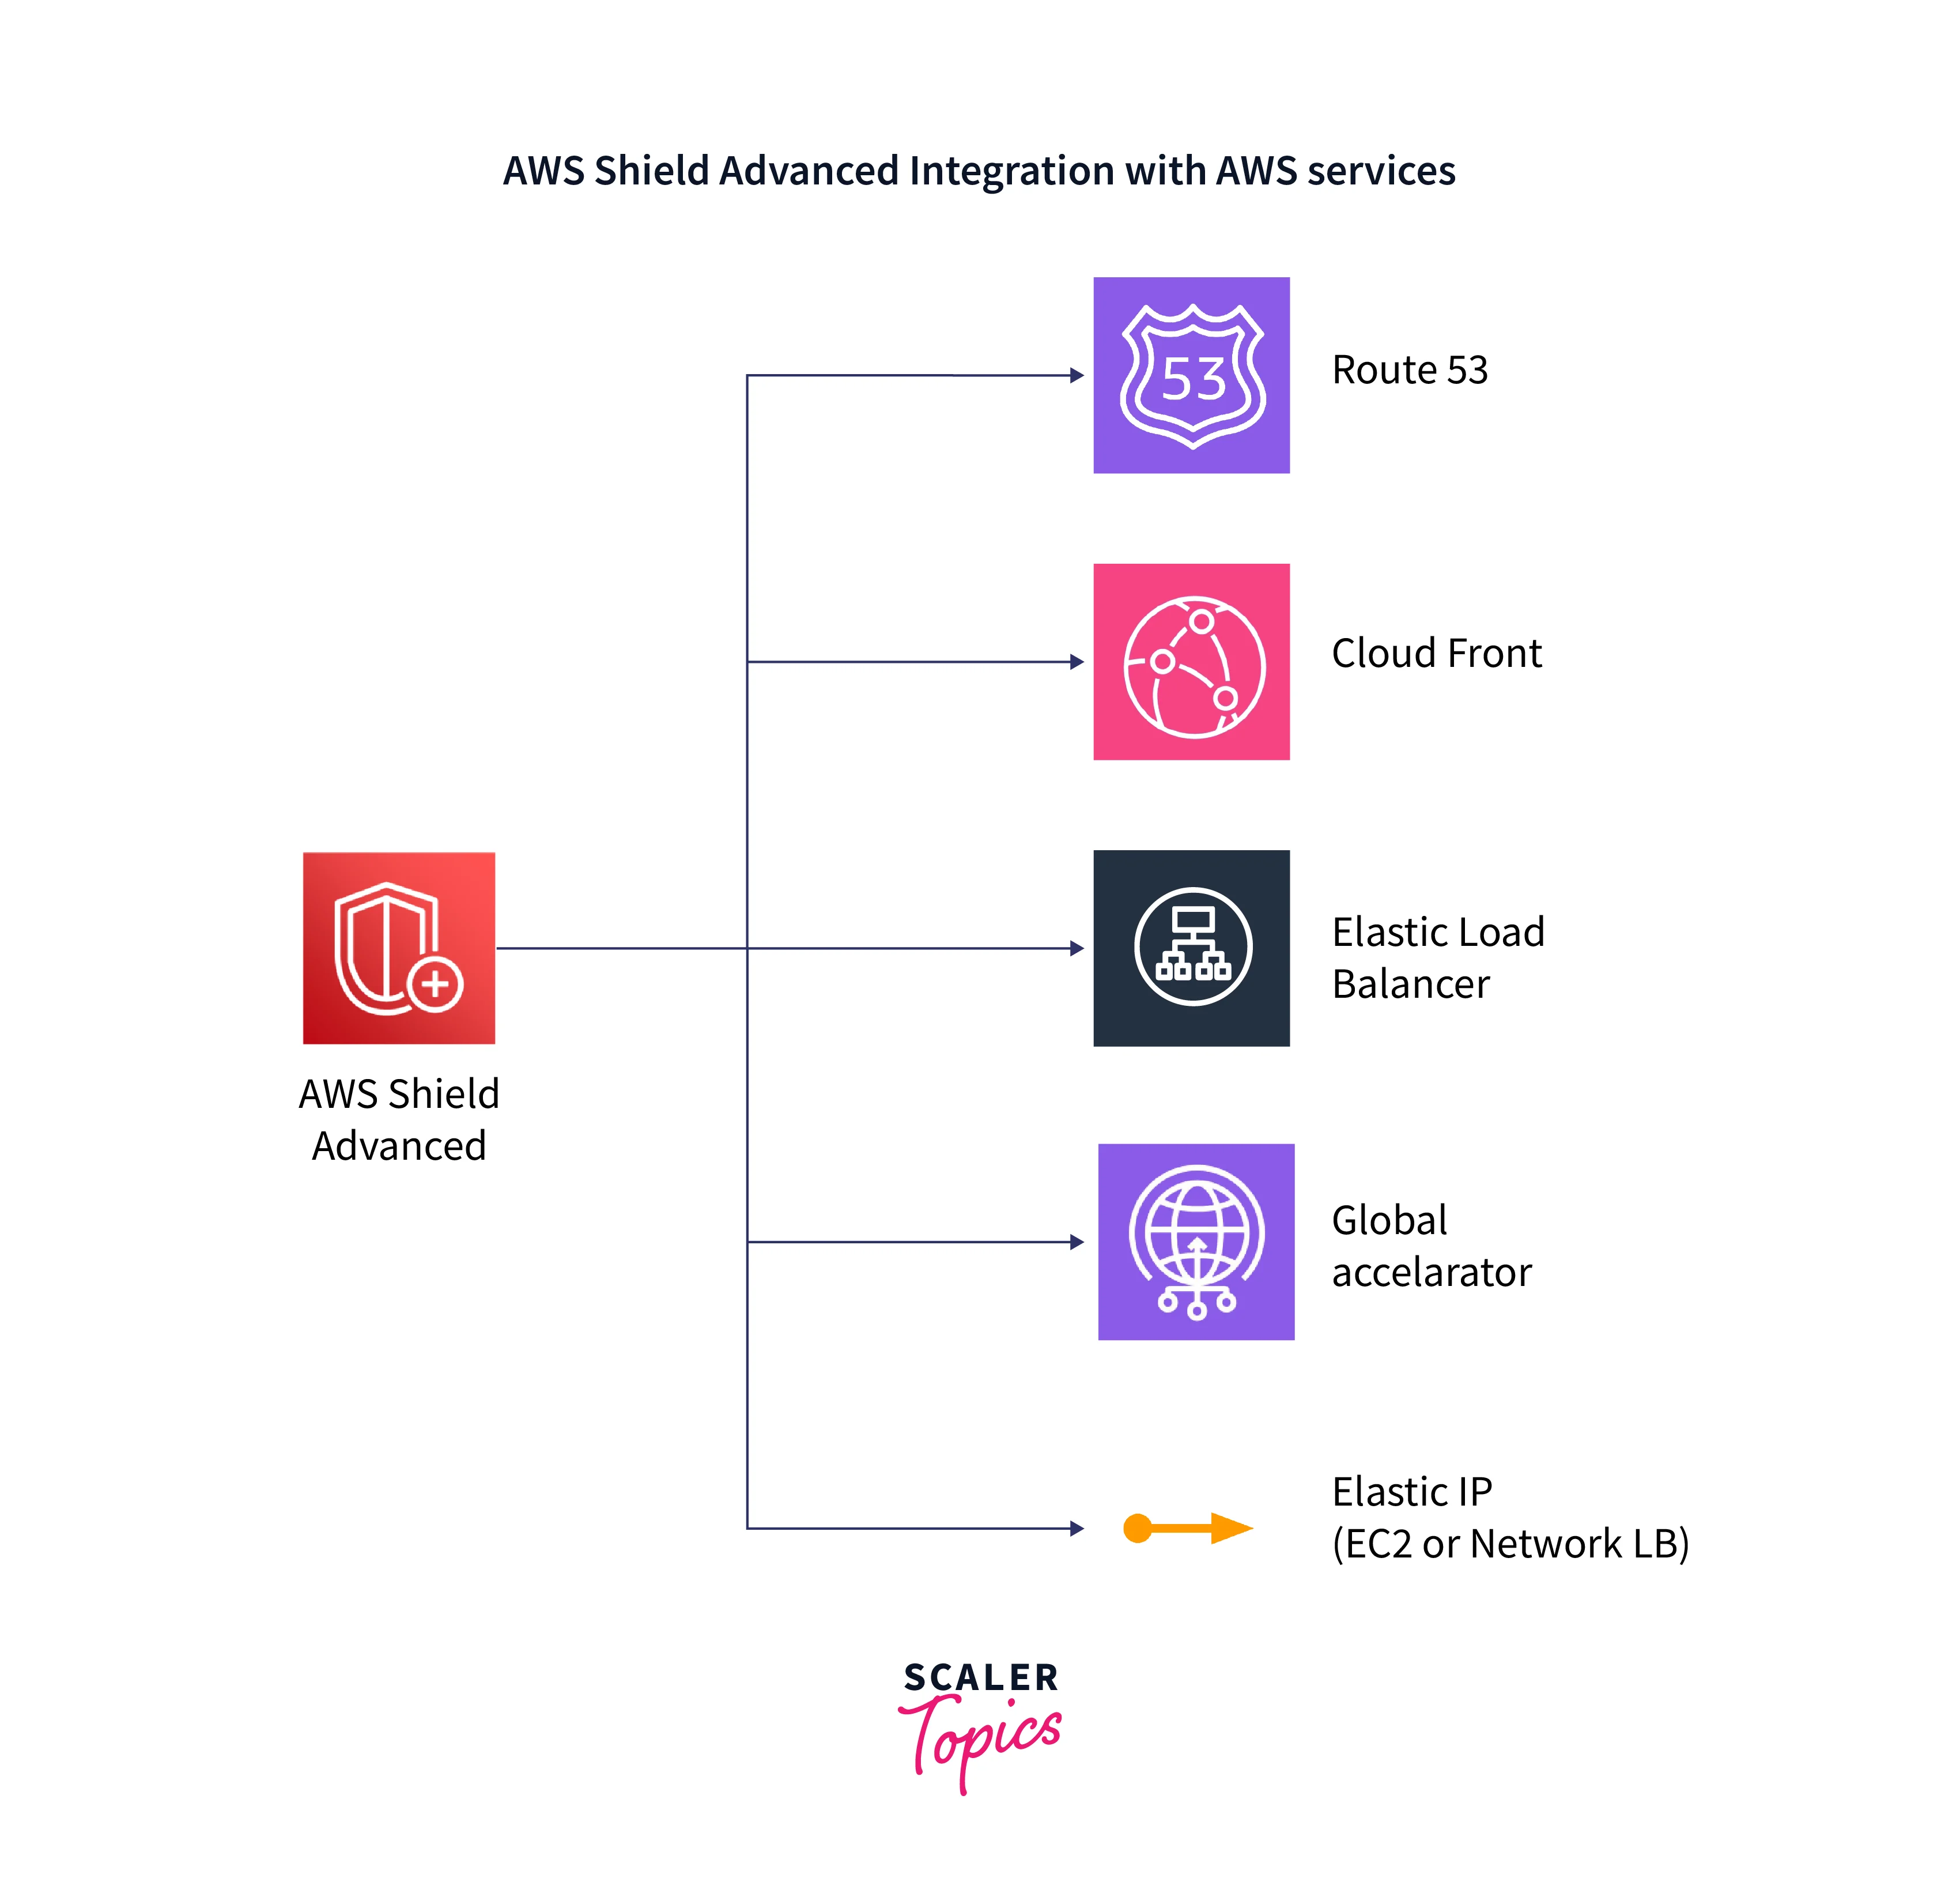 aws shield advanced integration with aws service